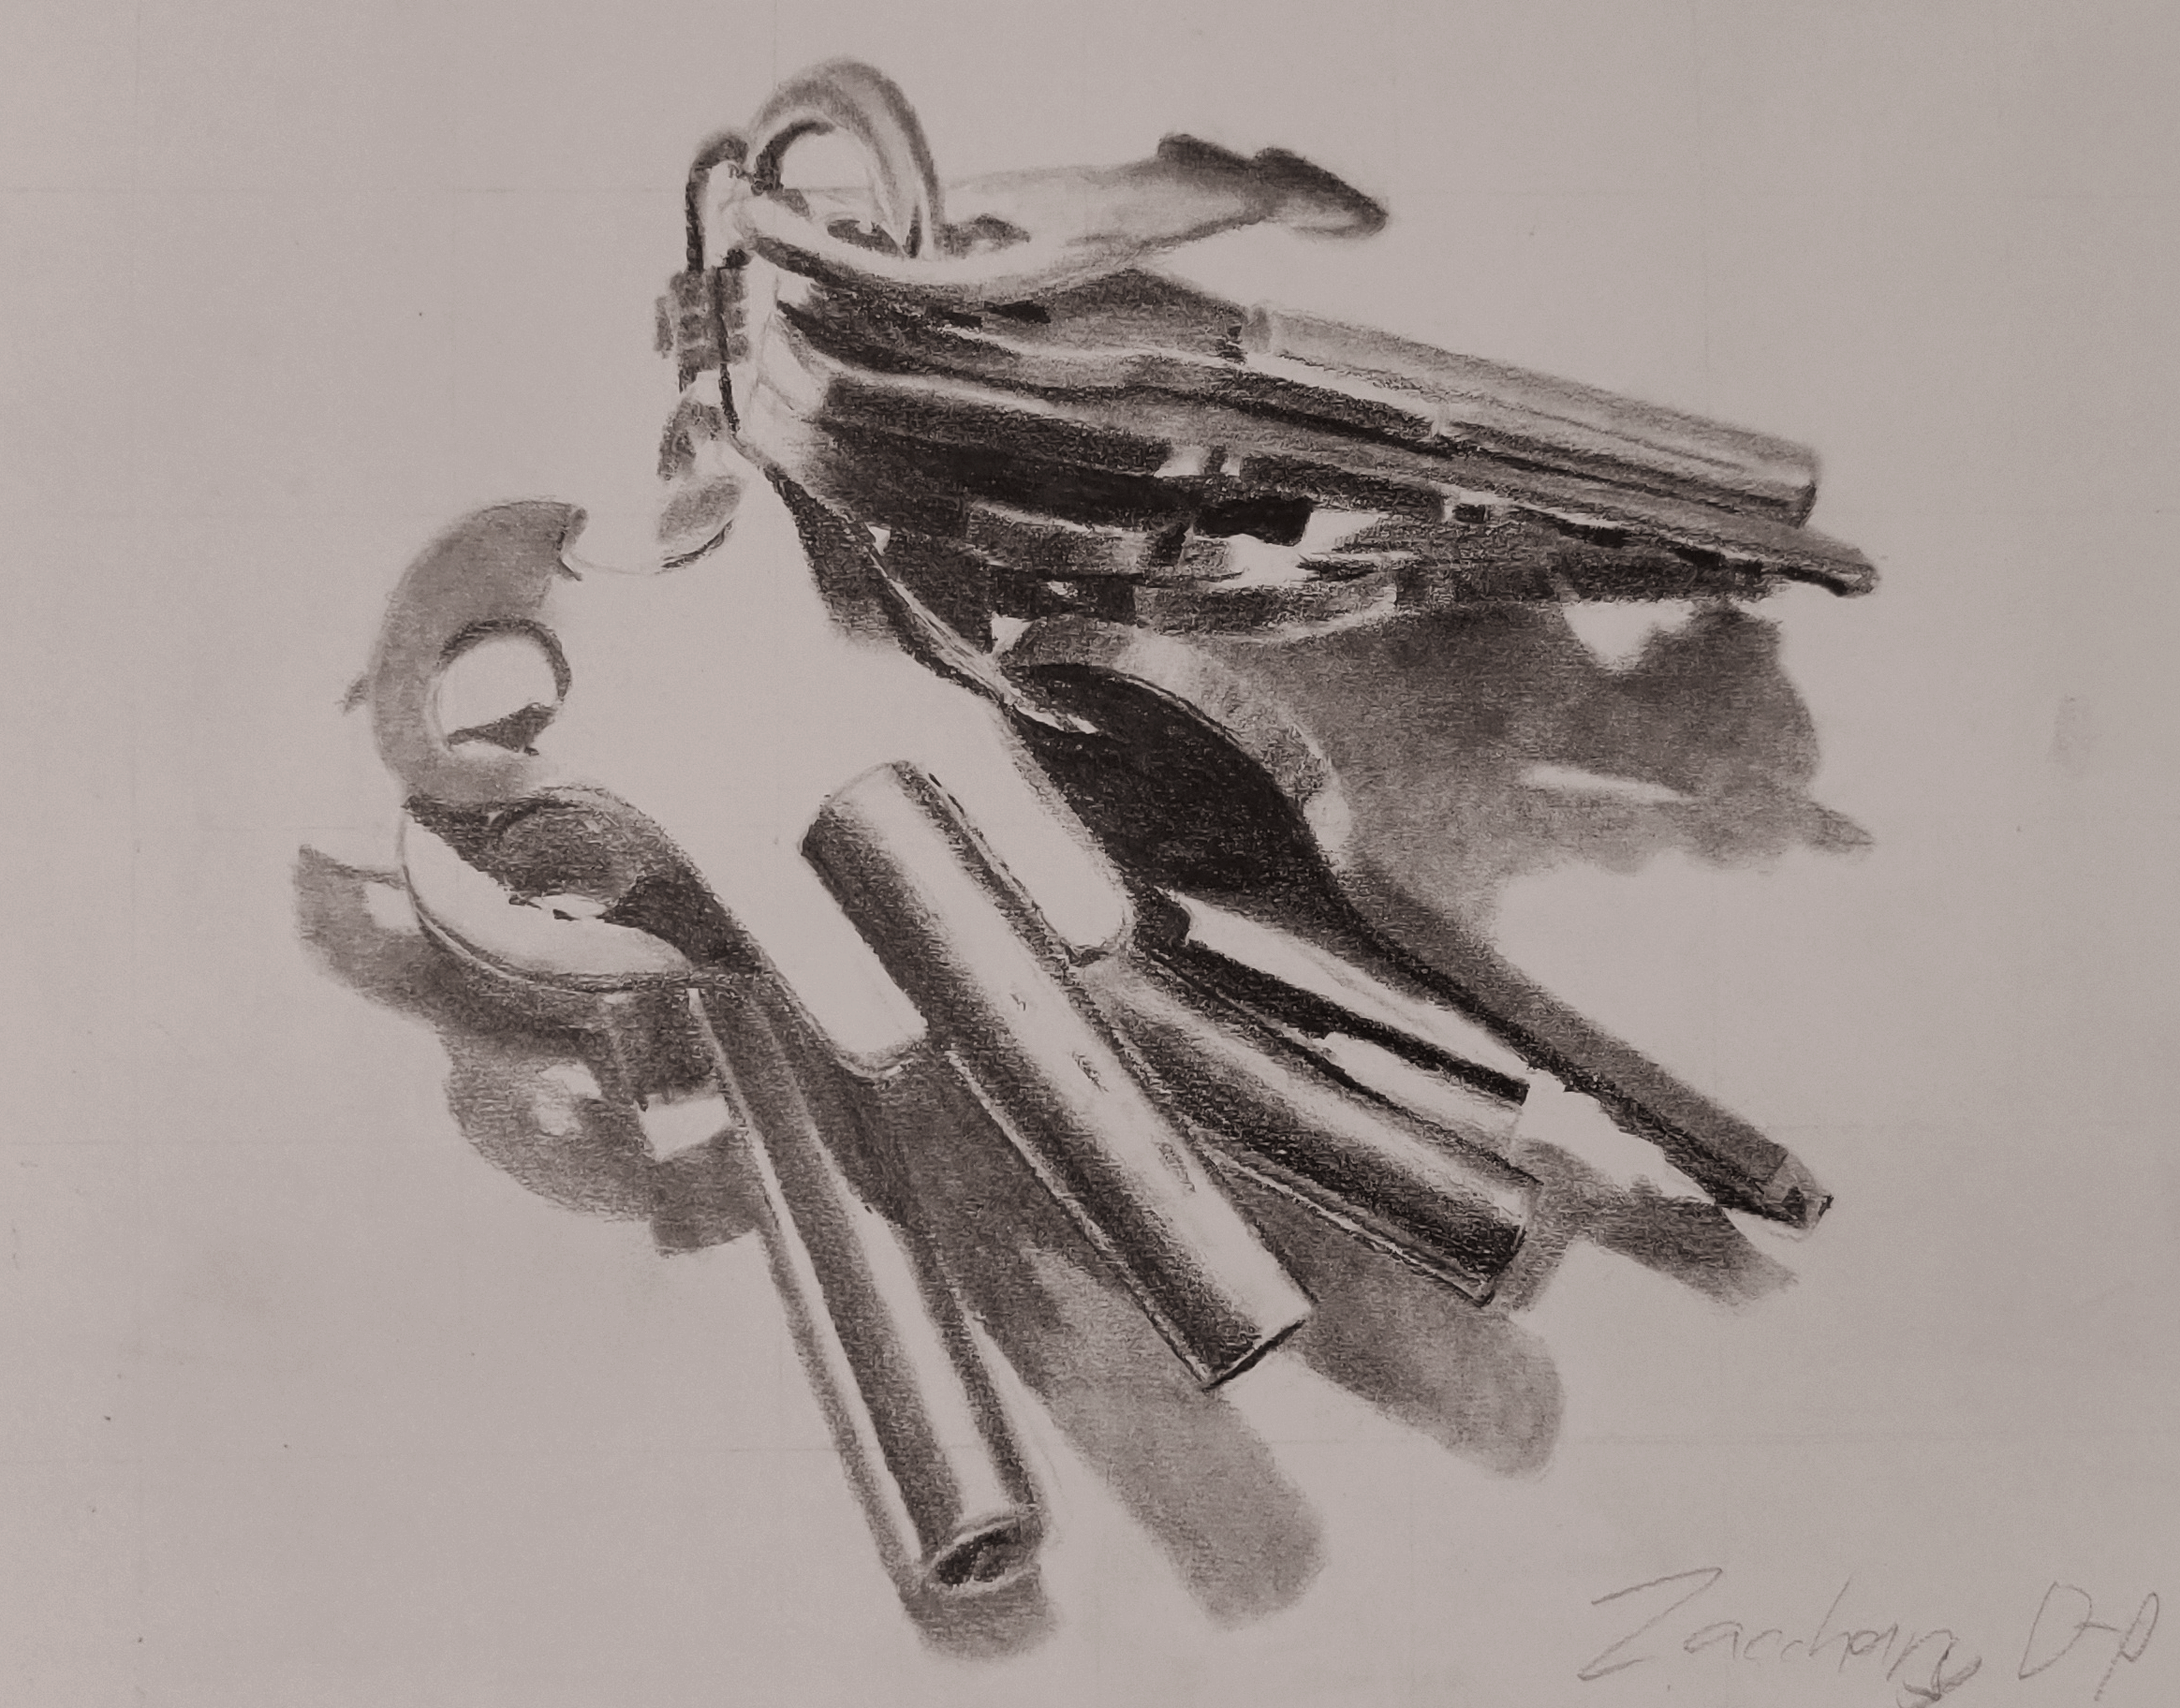 A drawing of a set of old keys resting on a windowsill.